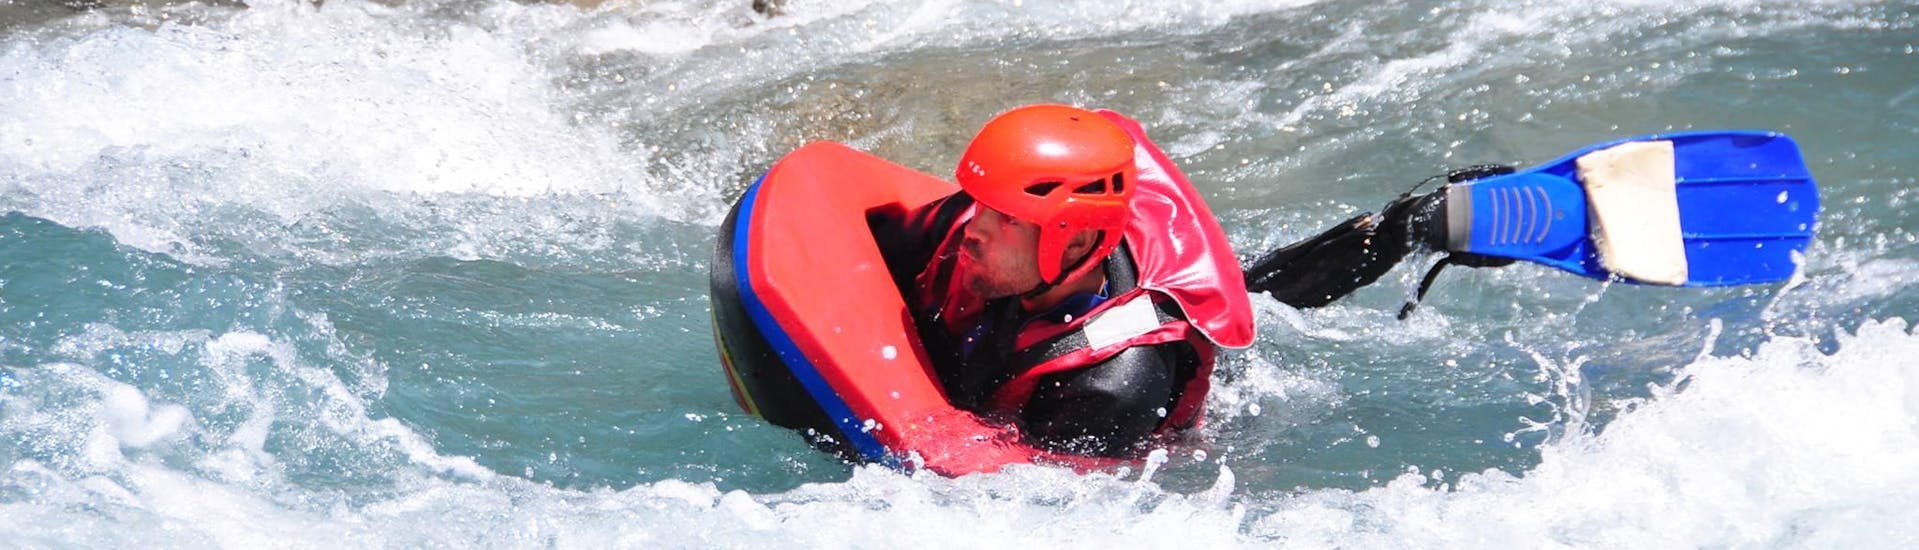 A man is surfing waves during his activity of Hydrospeed on the Ubaye River with Anaconda Rafting.